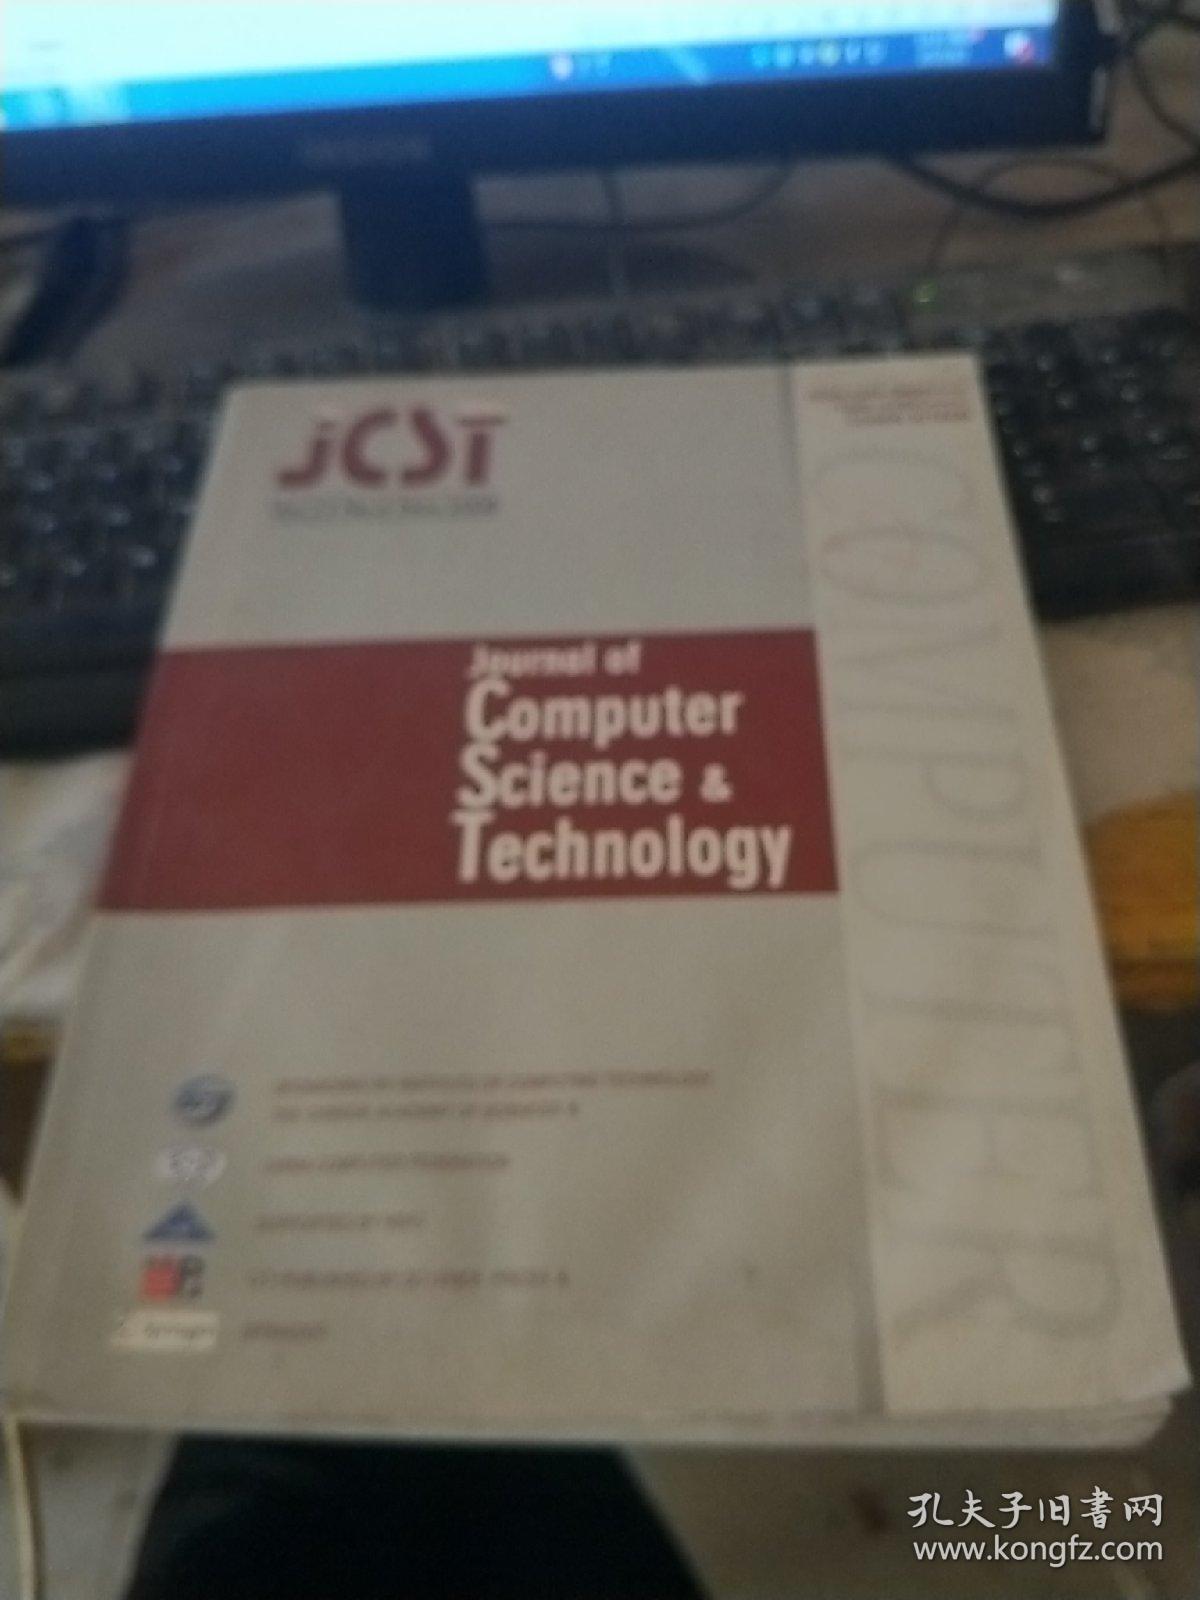 Journal of Computer Science & Technology 2008/06